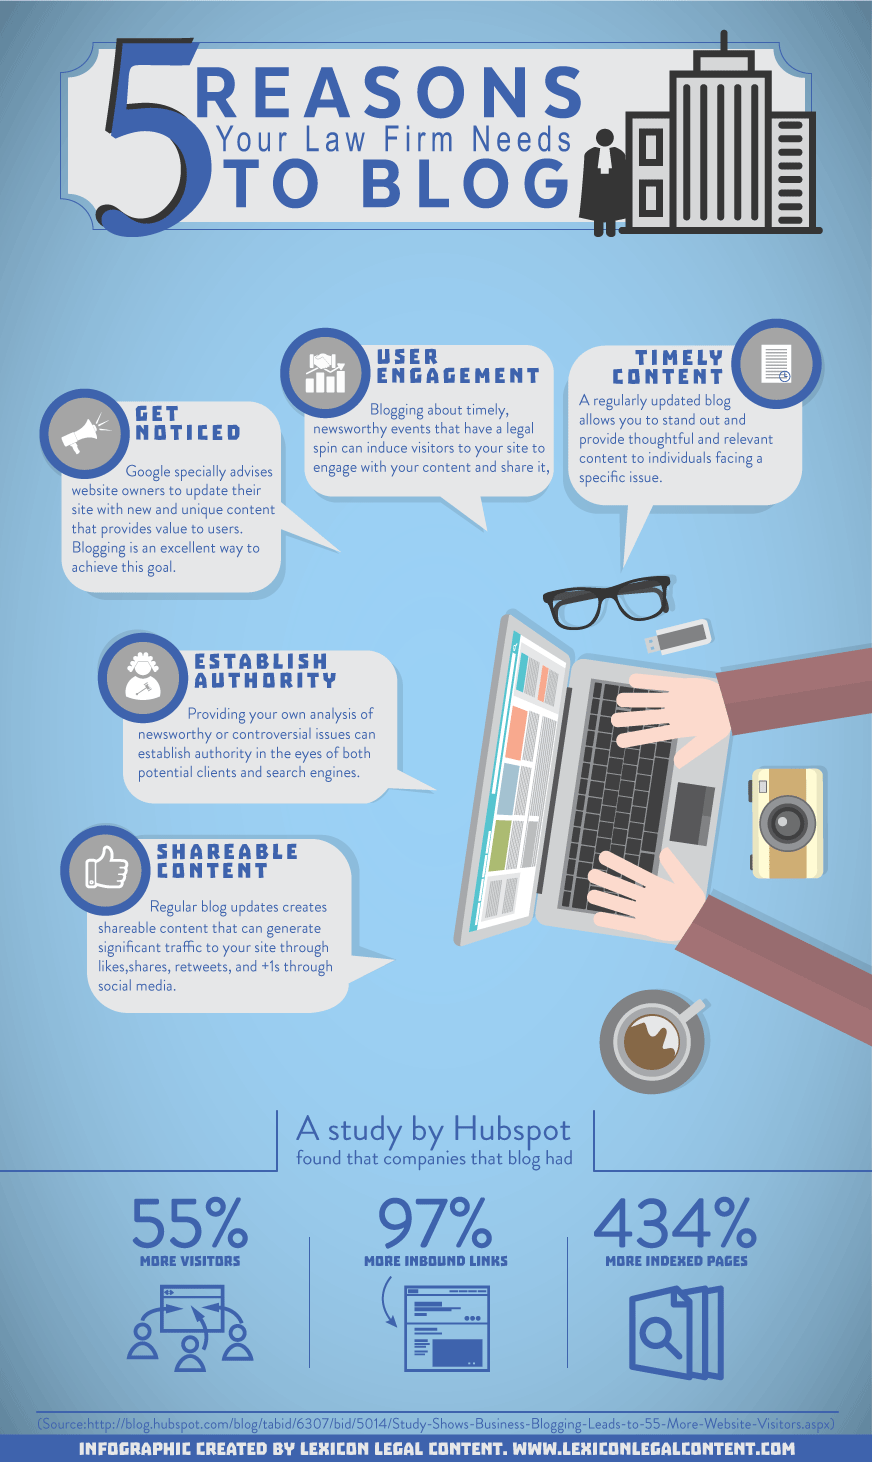 5 Reasons Your Law Firm Need to Blog - Infographic